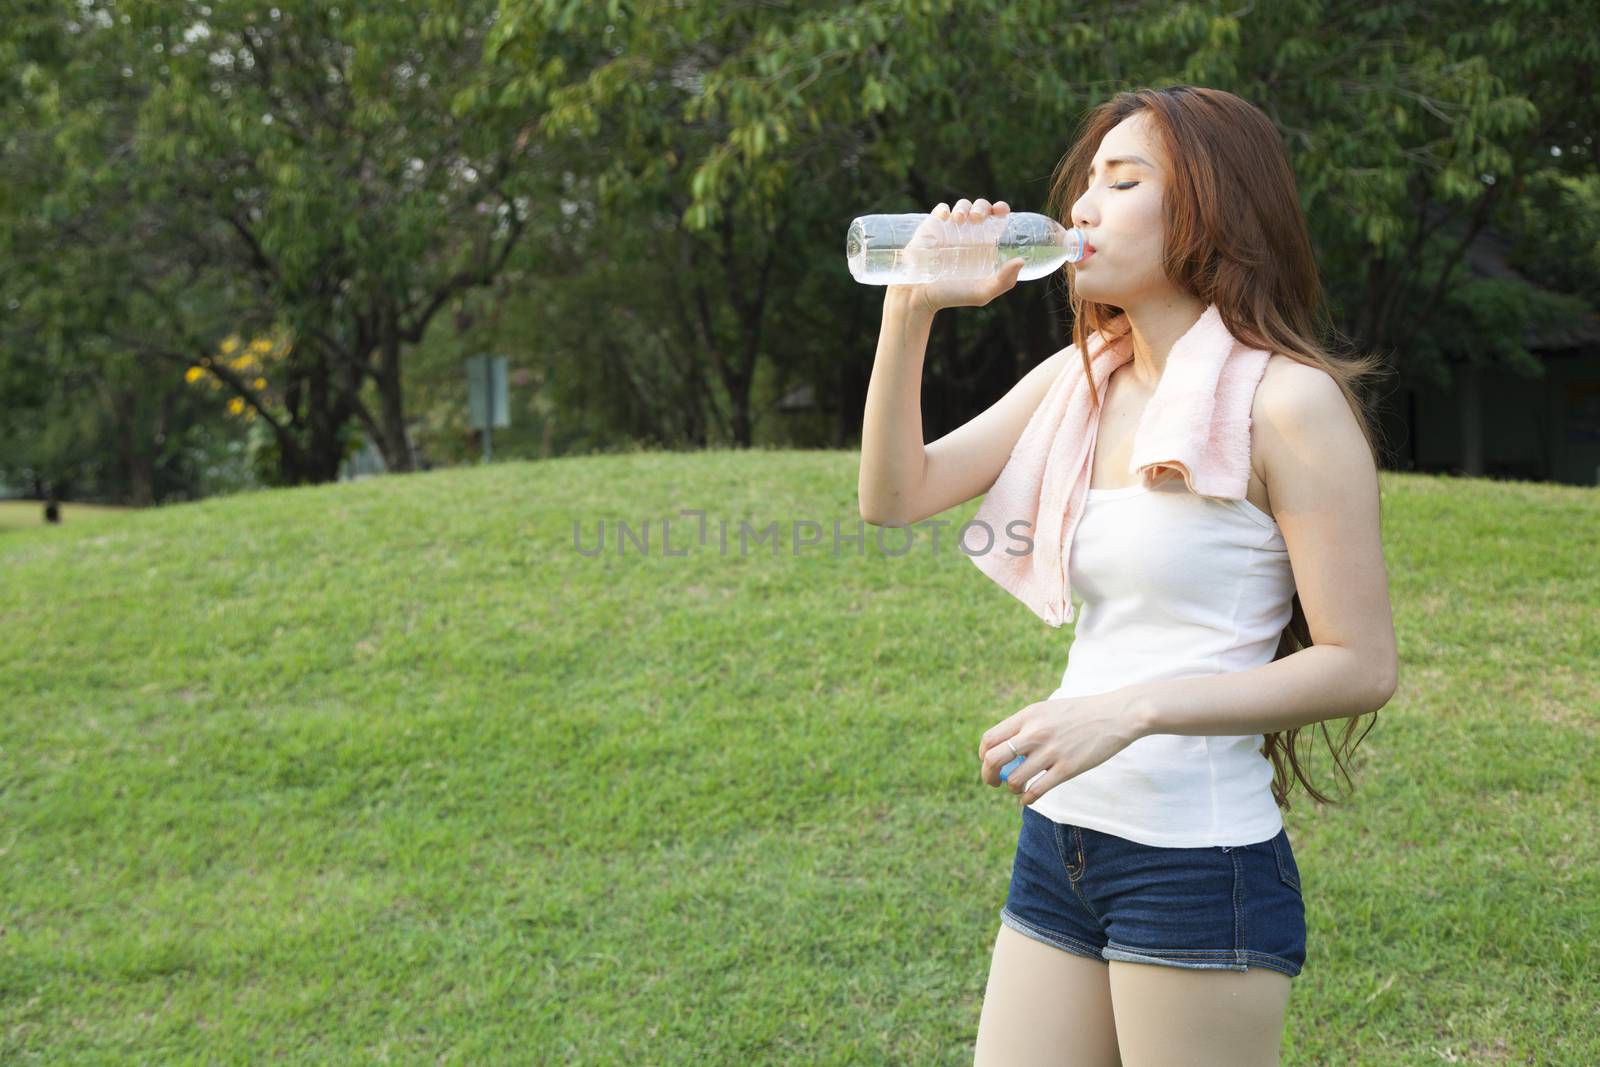 Woman standing water breaks during exercise. Jogging in the park during the evening.